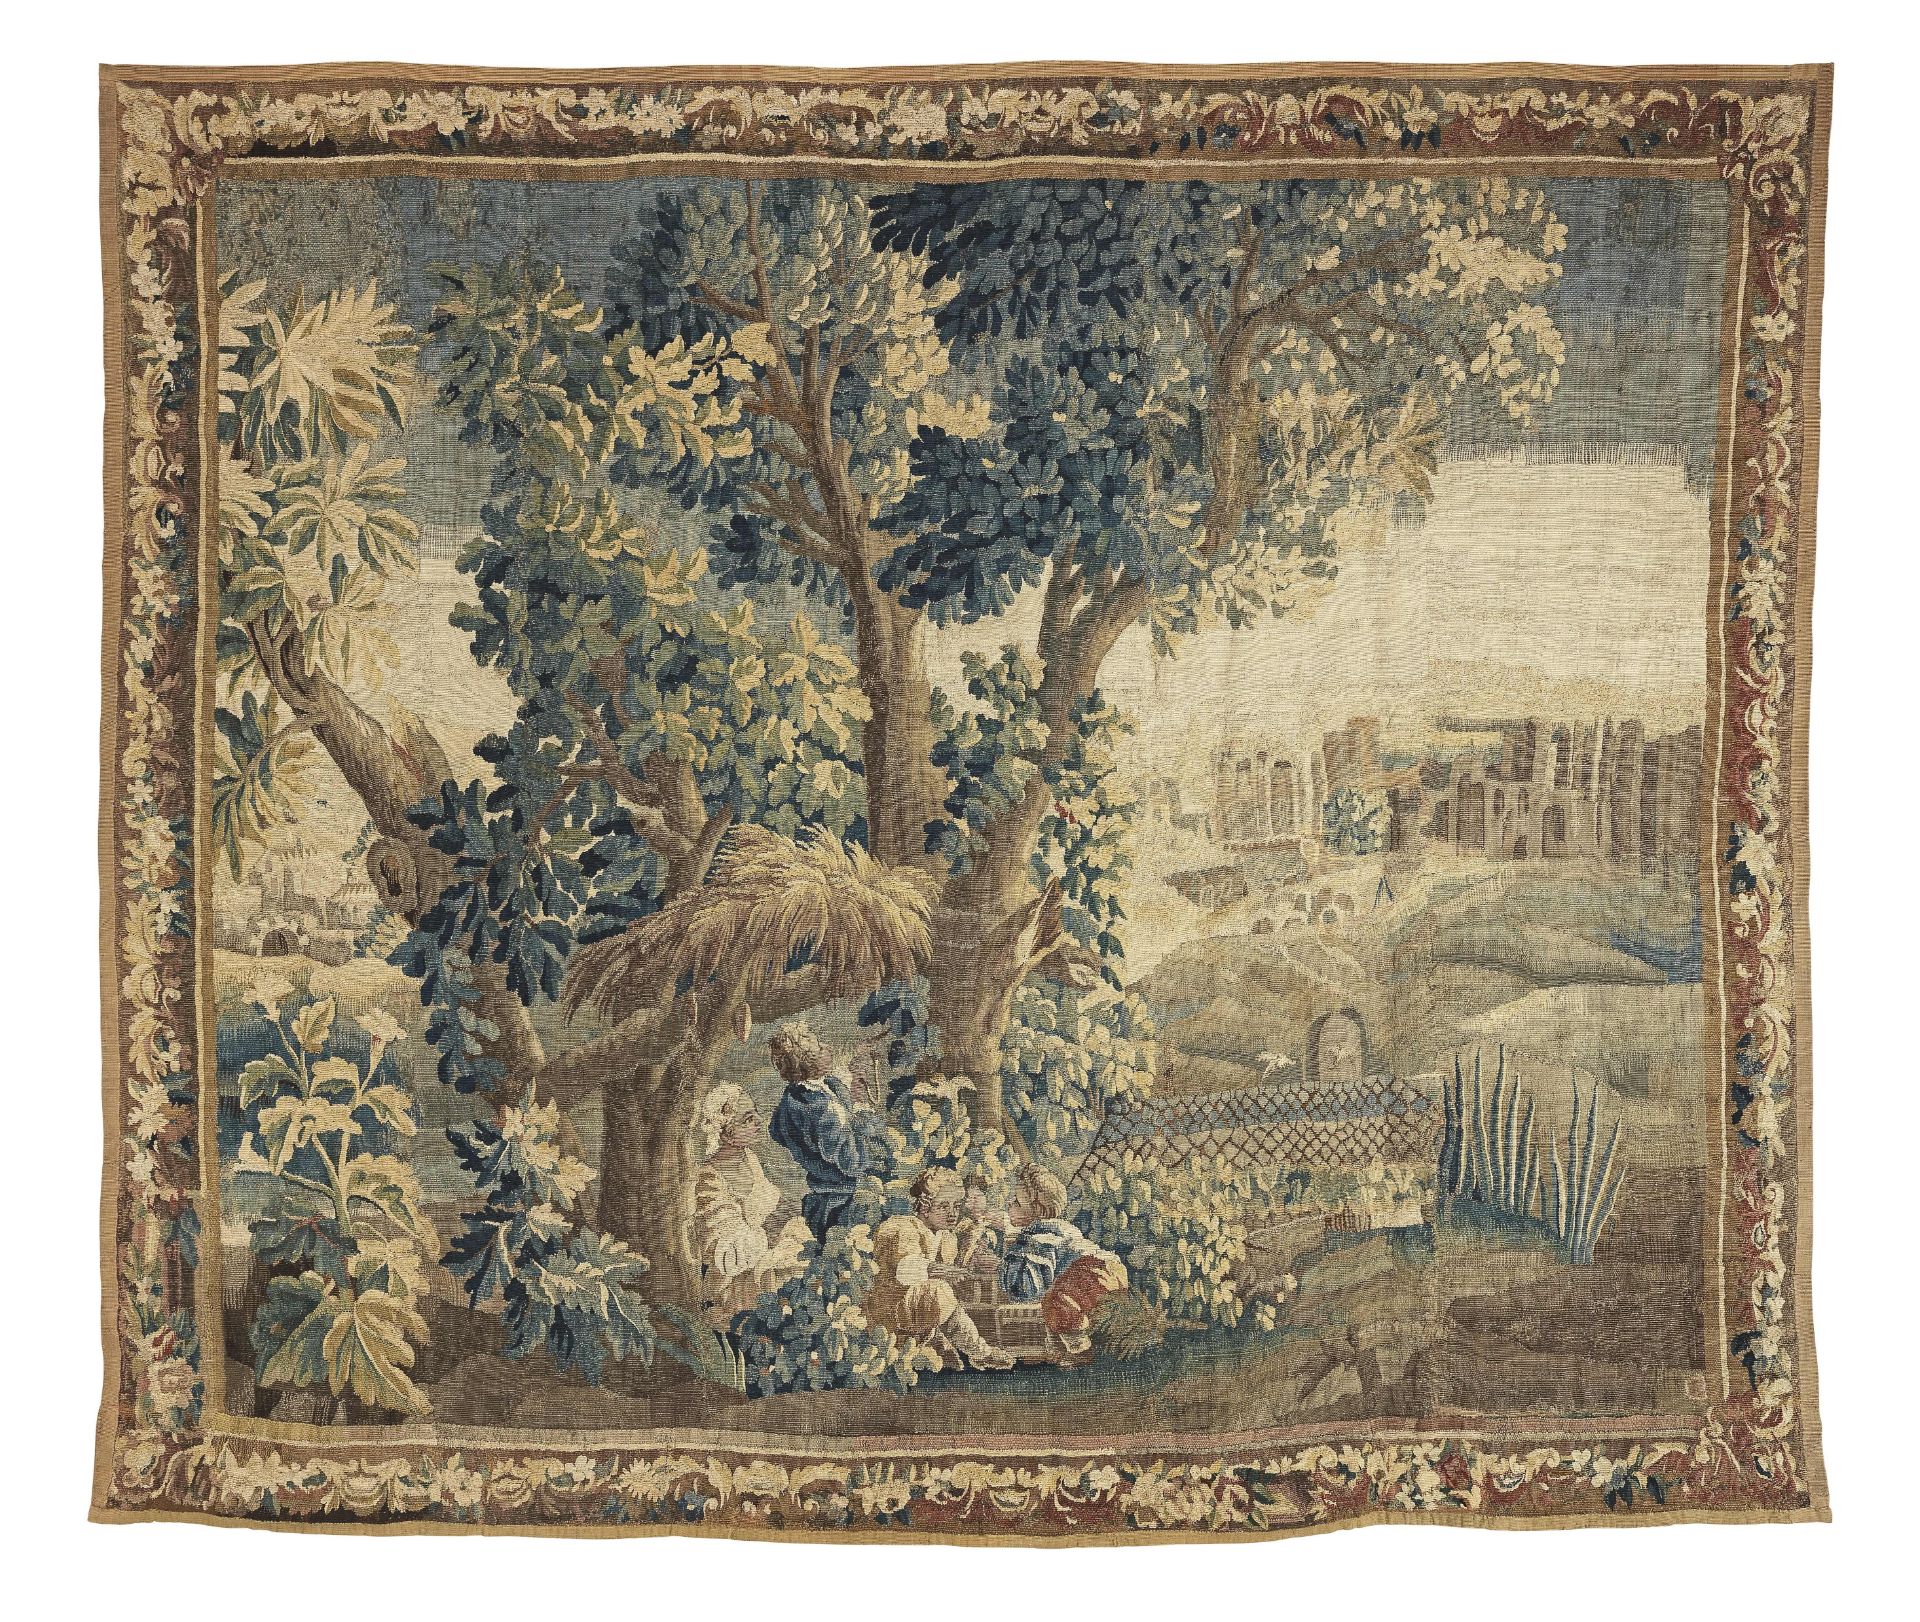 A charming Flemish Verdure Tapestry mid to late 18th century 282cm x 250cm